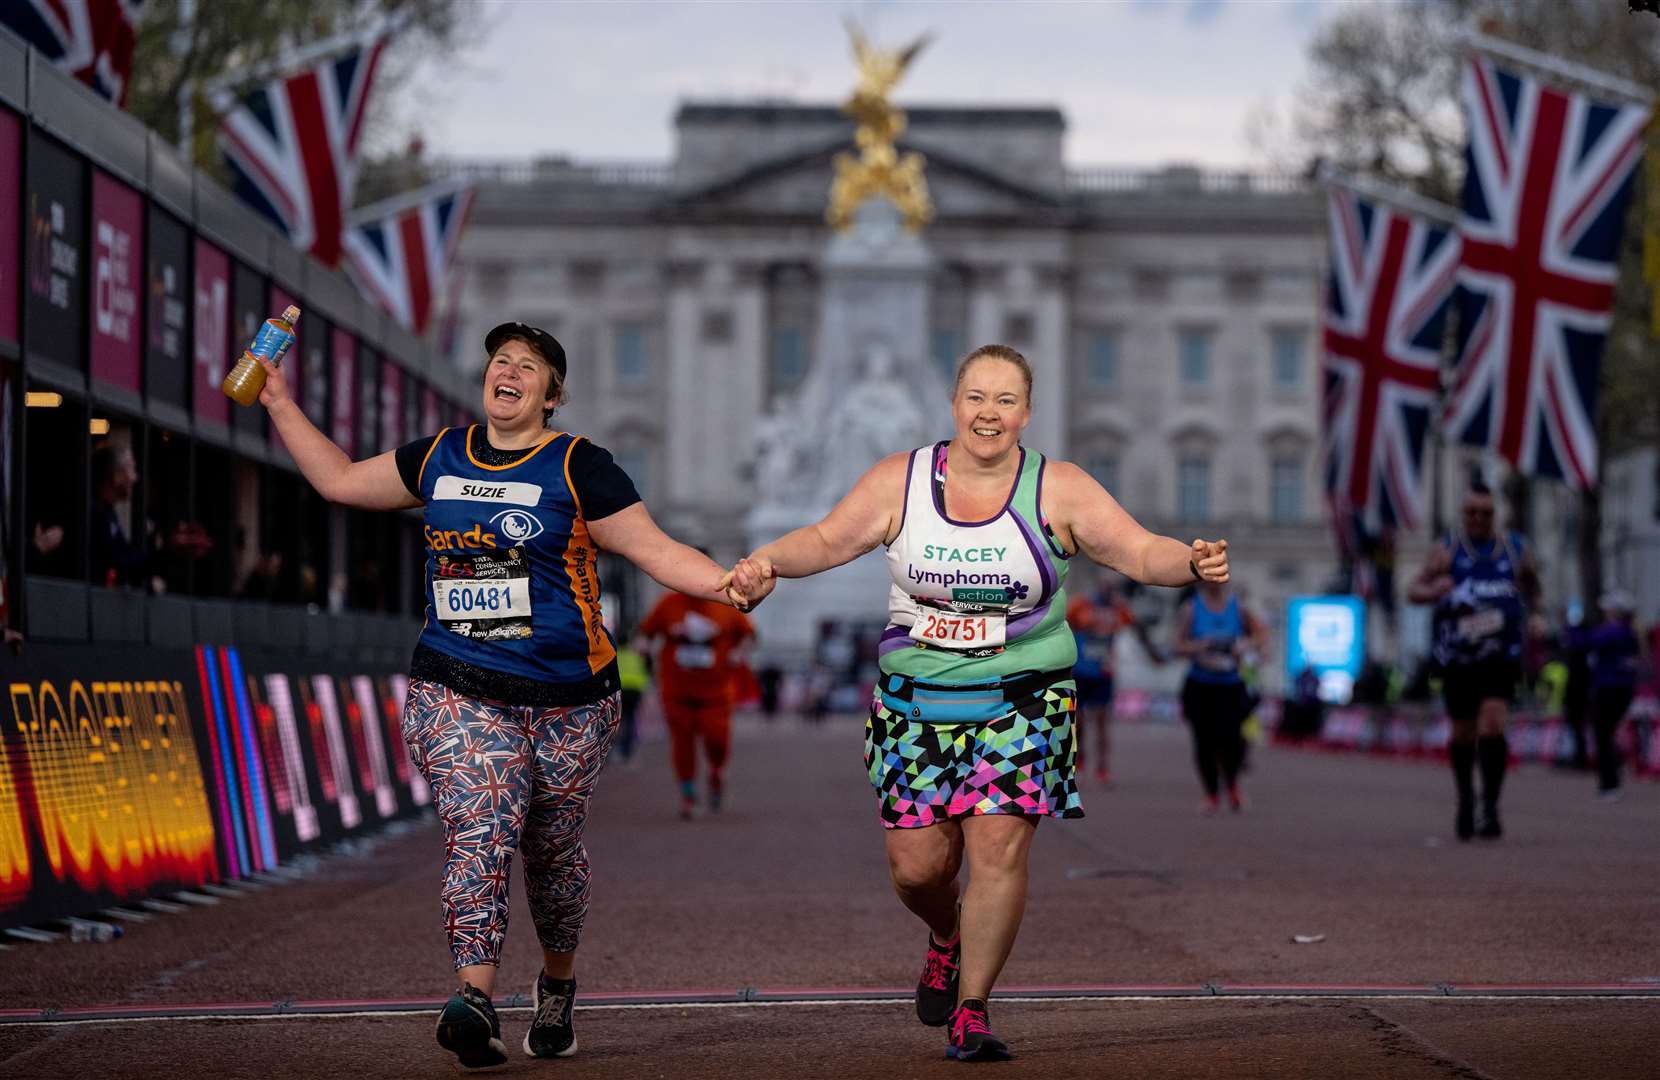 Runners can apply this weekend to join next year’s race. Credit: TCS London Marathon.